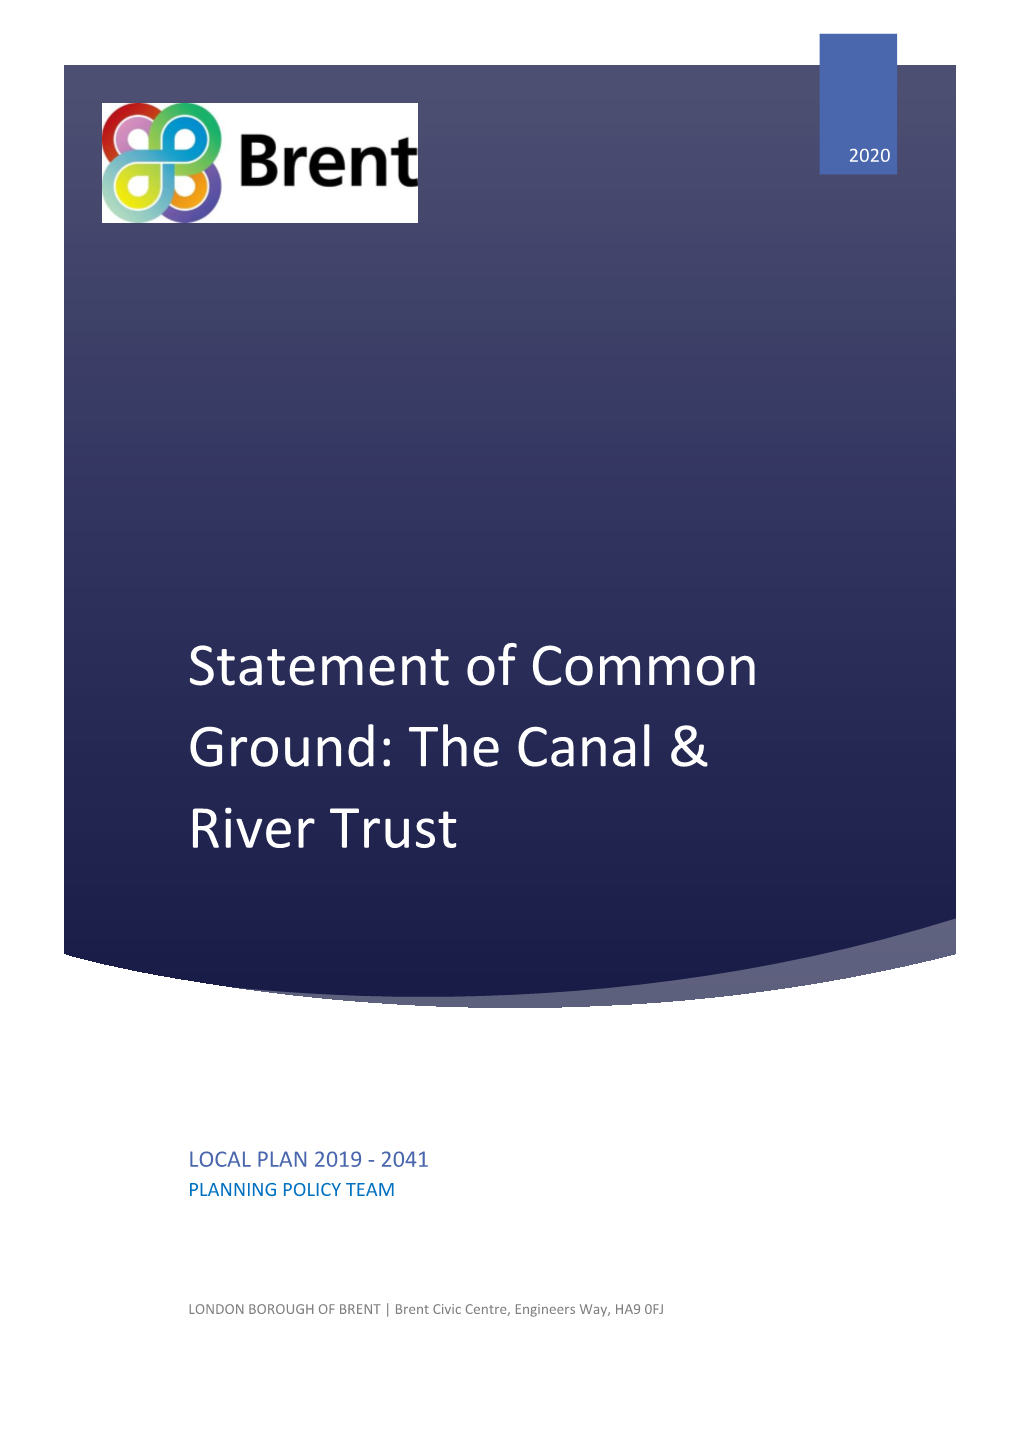 The Canal & River Trust